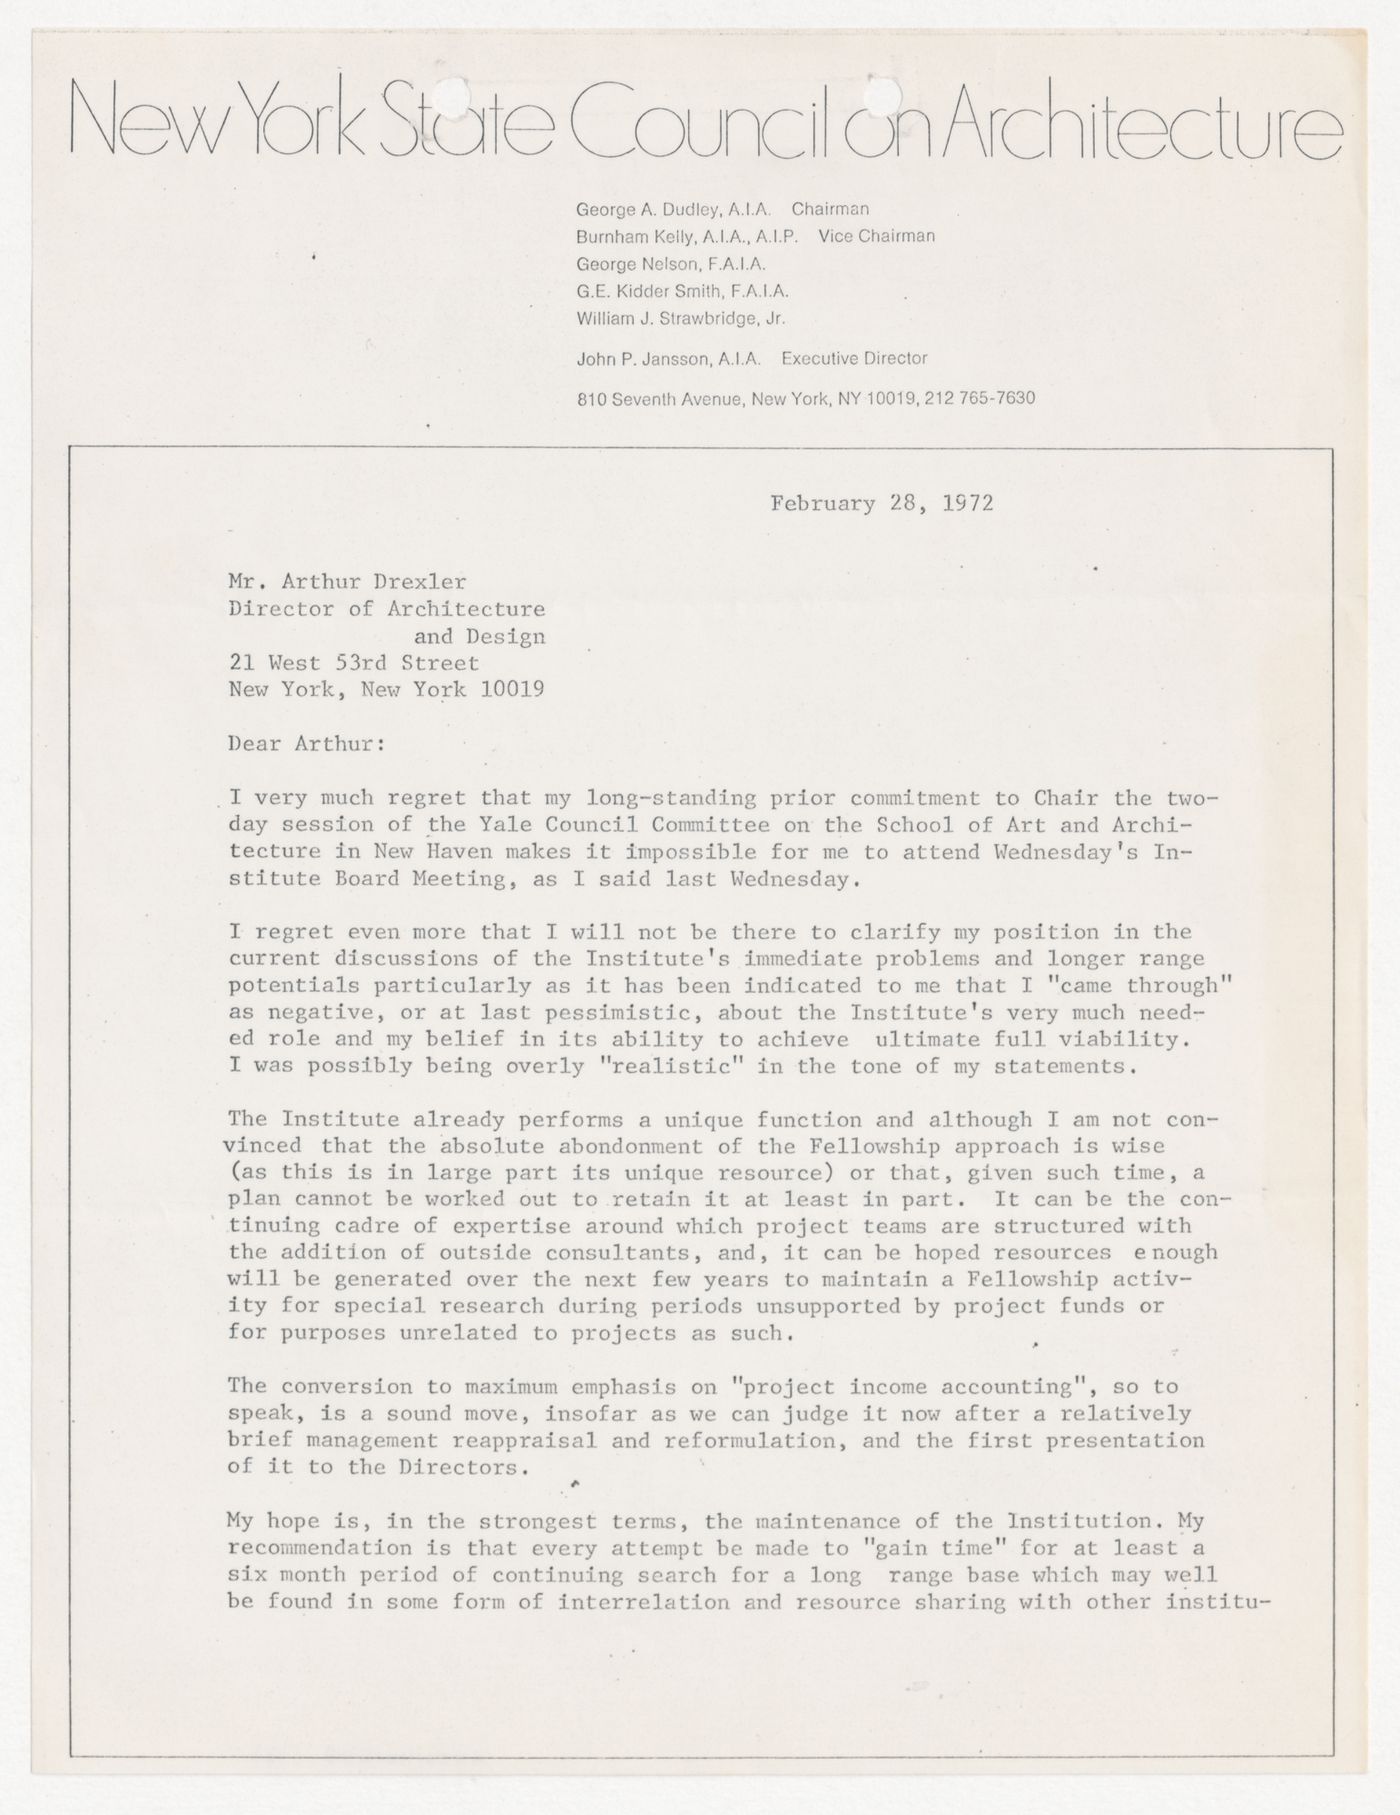 Letter from George A. Dudley to Arthur Drexler about long term sustainability of IAUS